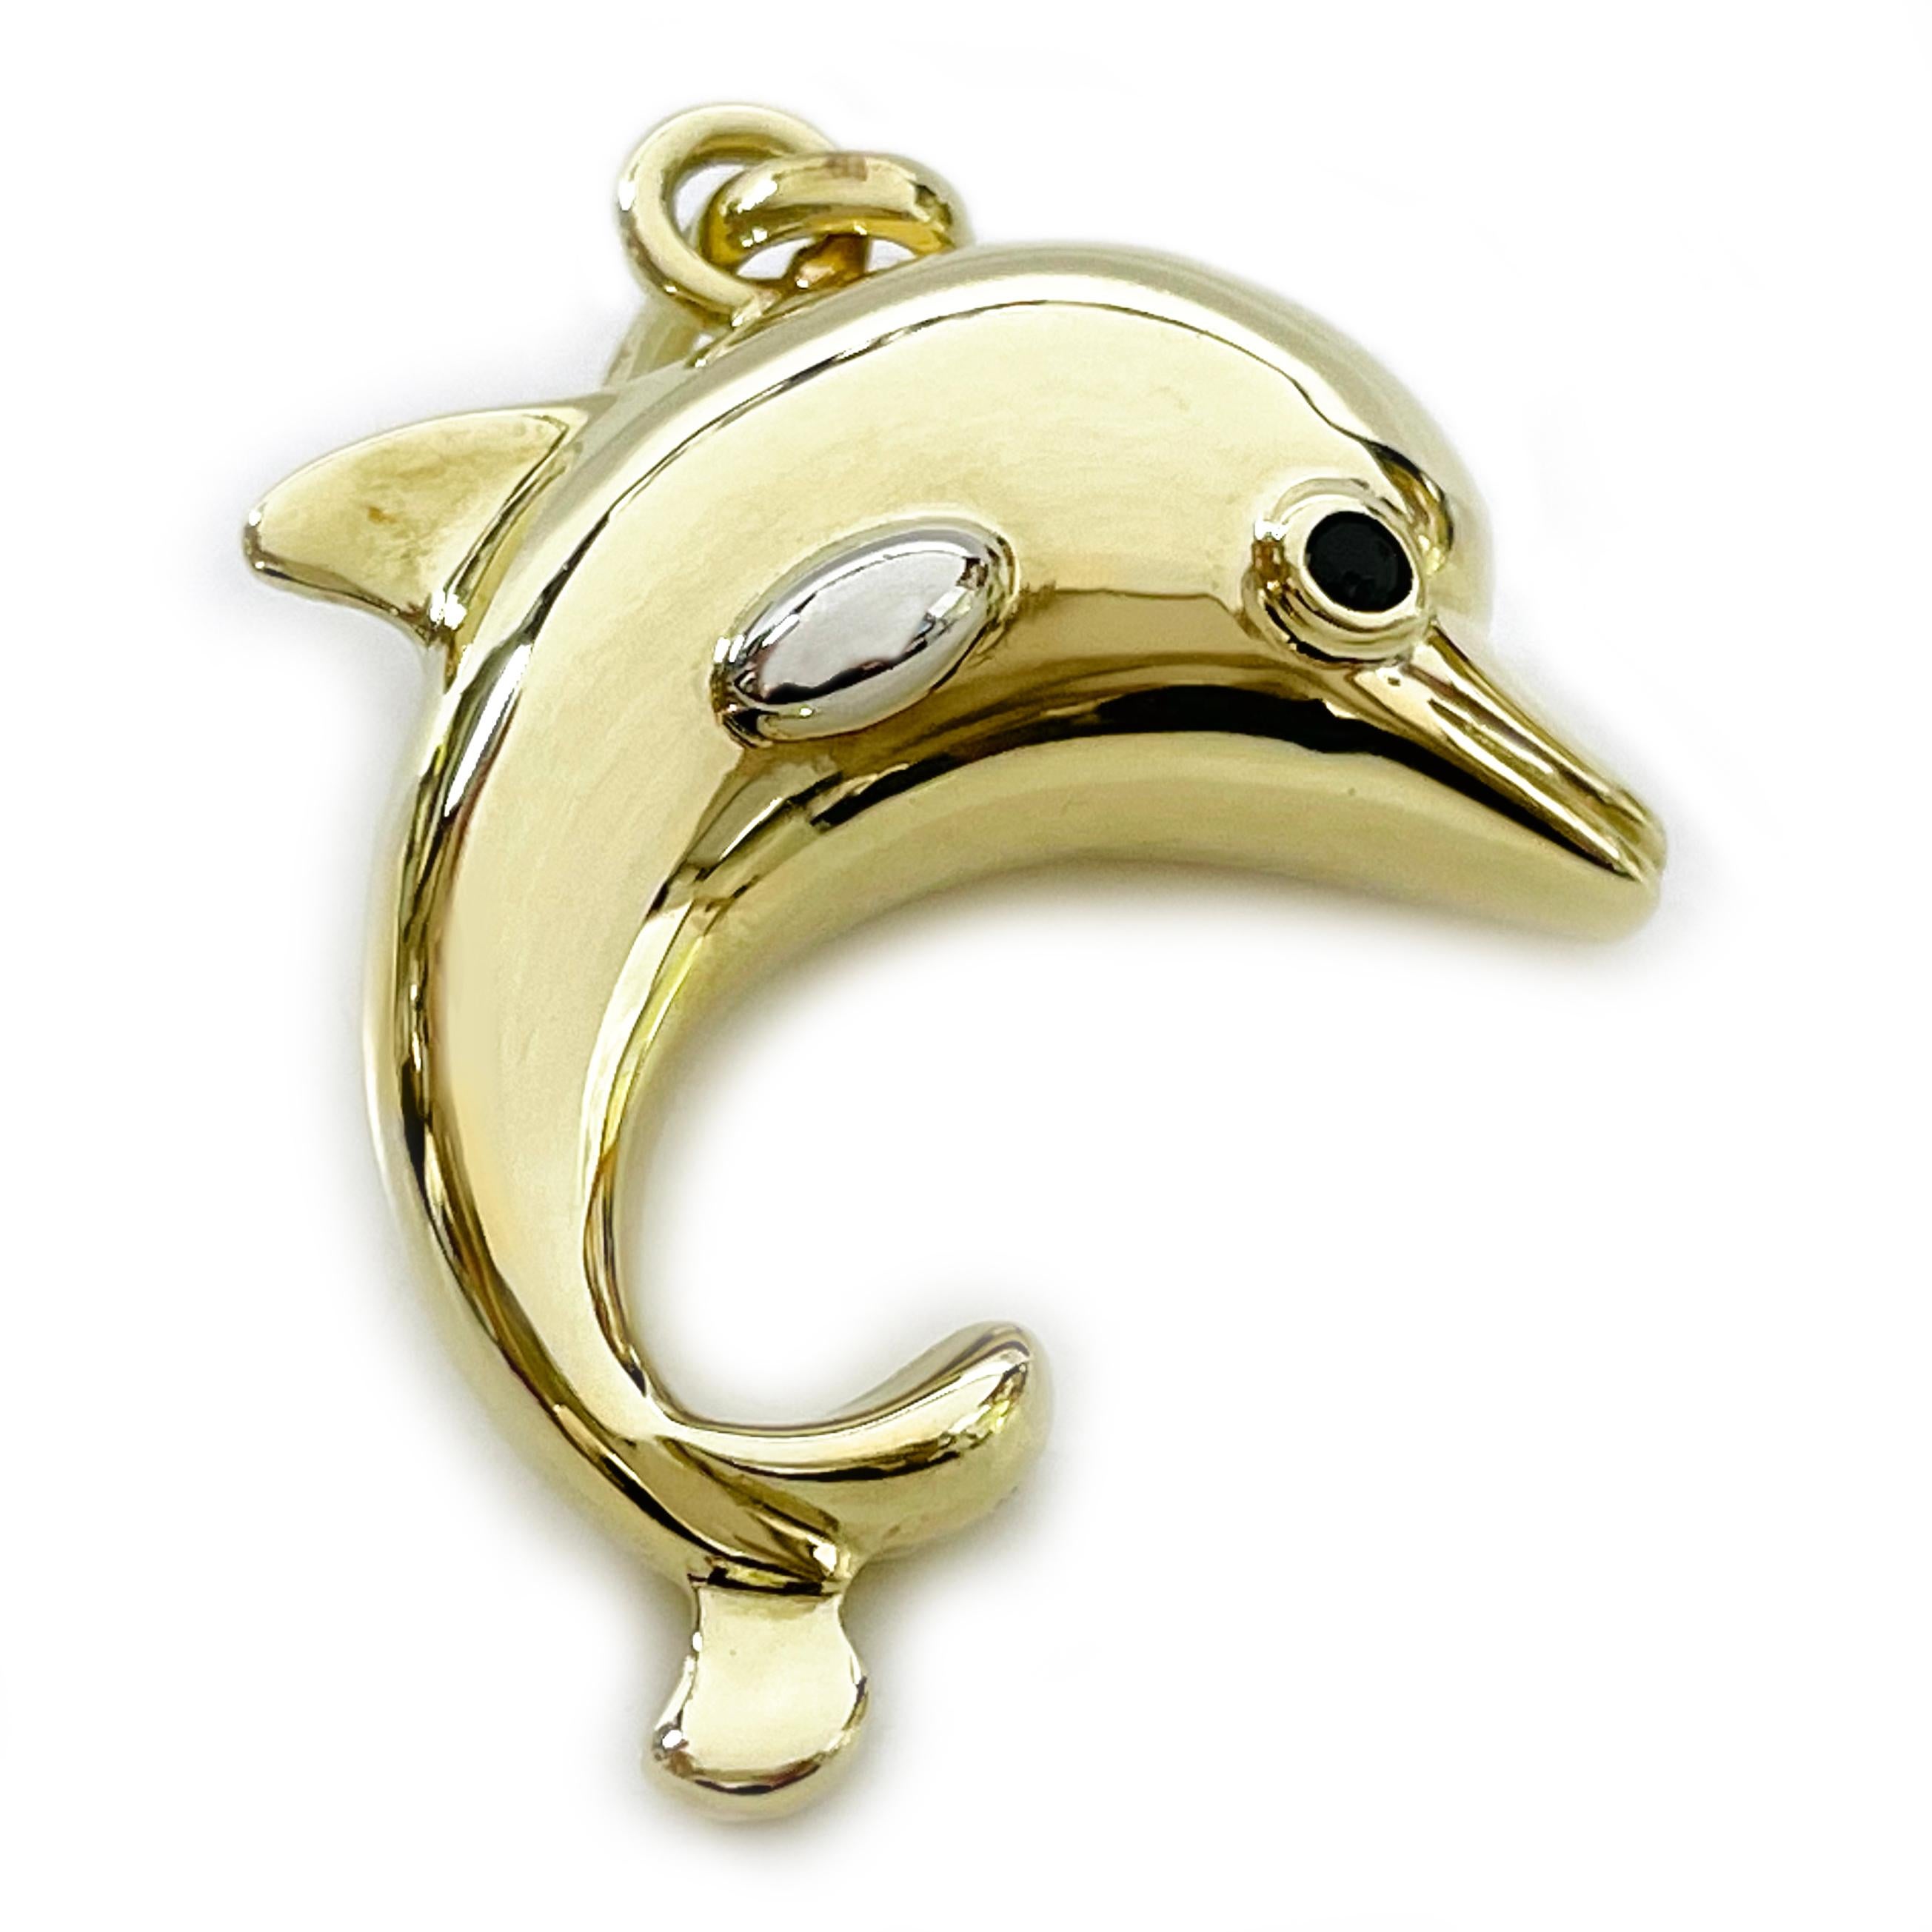 Yellow and White Gold Dolphin Pendant. The pendant features a three-dimensional yellow gold dolphin with black faceted stones bezel-set in the eyes. The side fins are in white gold while the rest of the pendant is yellow gold, the pendant has an